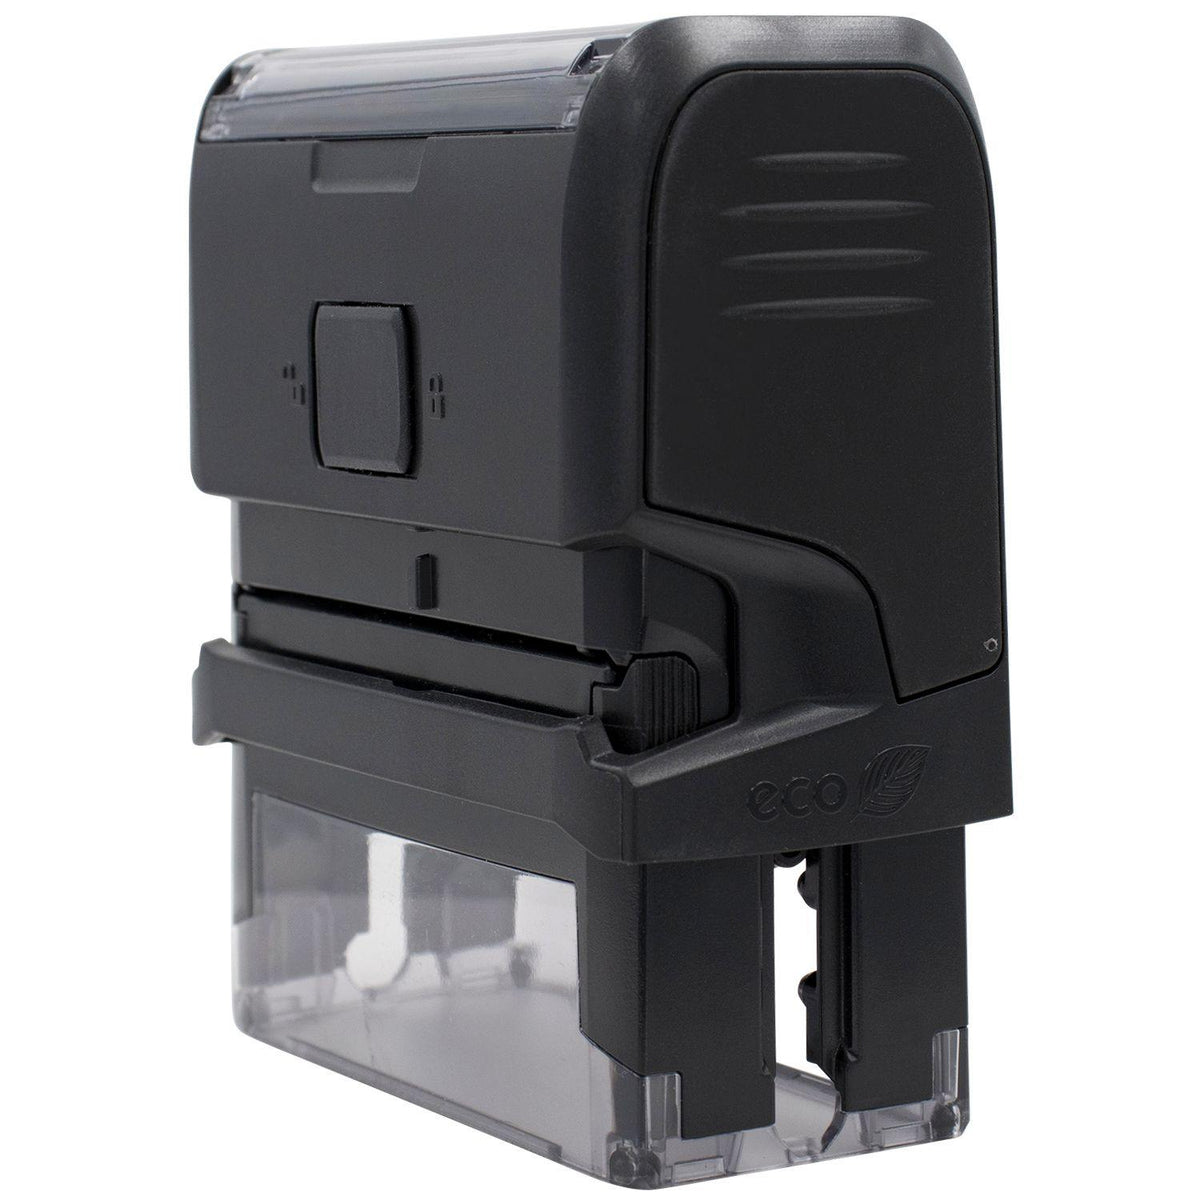 Large Self-Inking Narrow For Deposit Only Stamp - Engineer Seal Stamps - Brand_Trodat, Impression Size_Large, Stamp Type_Self-Inking Stamp, Type of Use_Business, Type of Use_Finance, Type of Use_Office